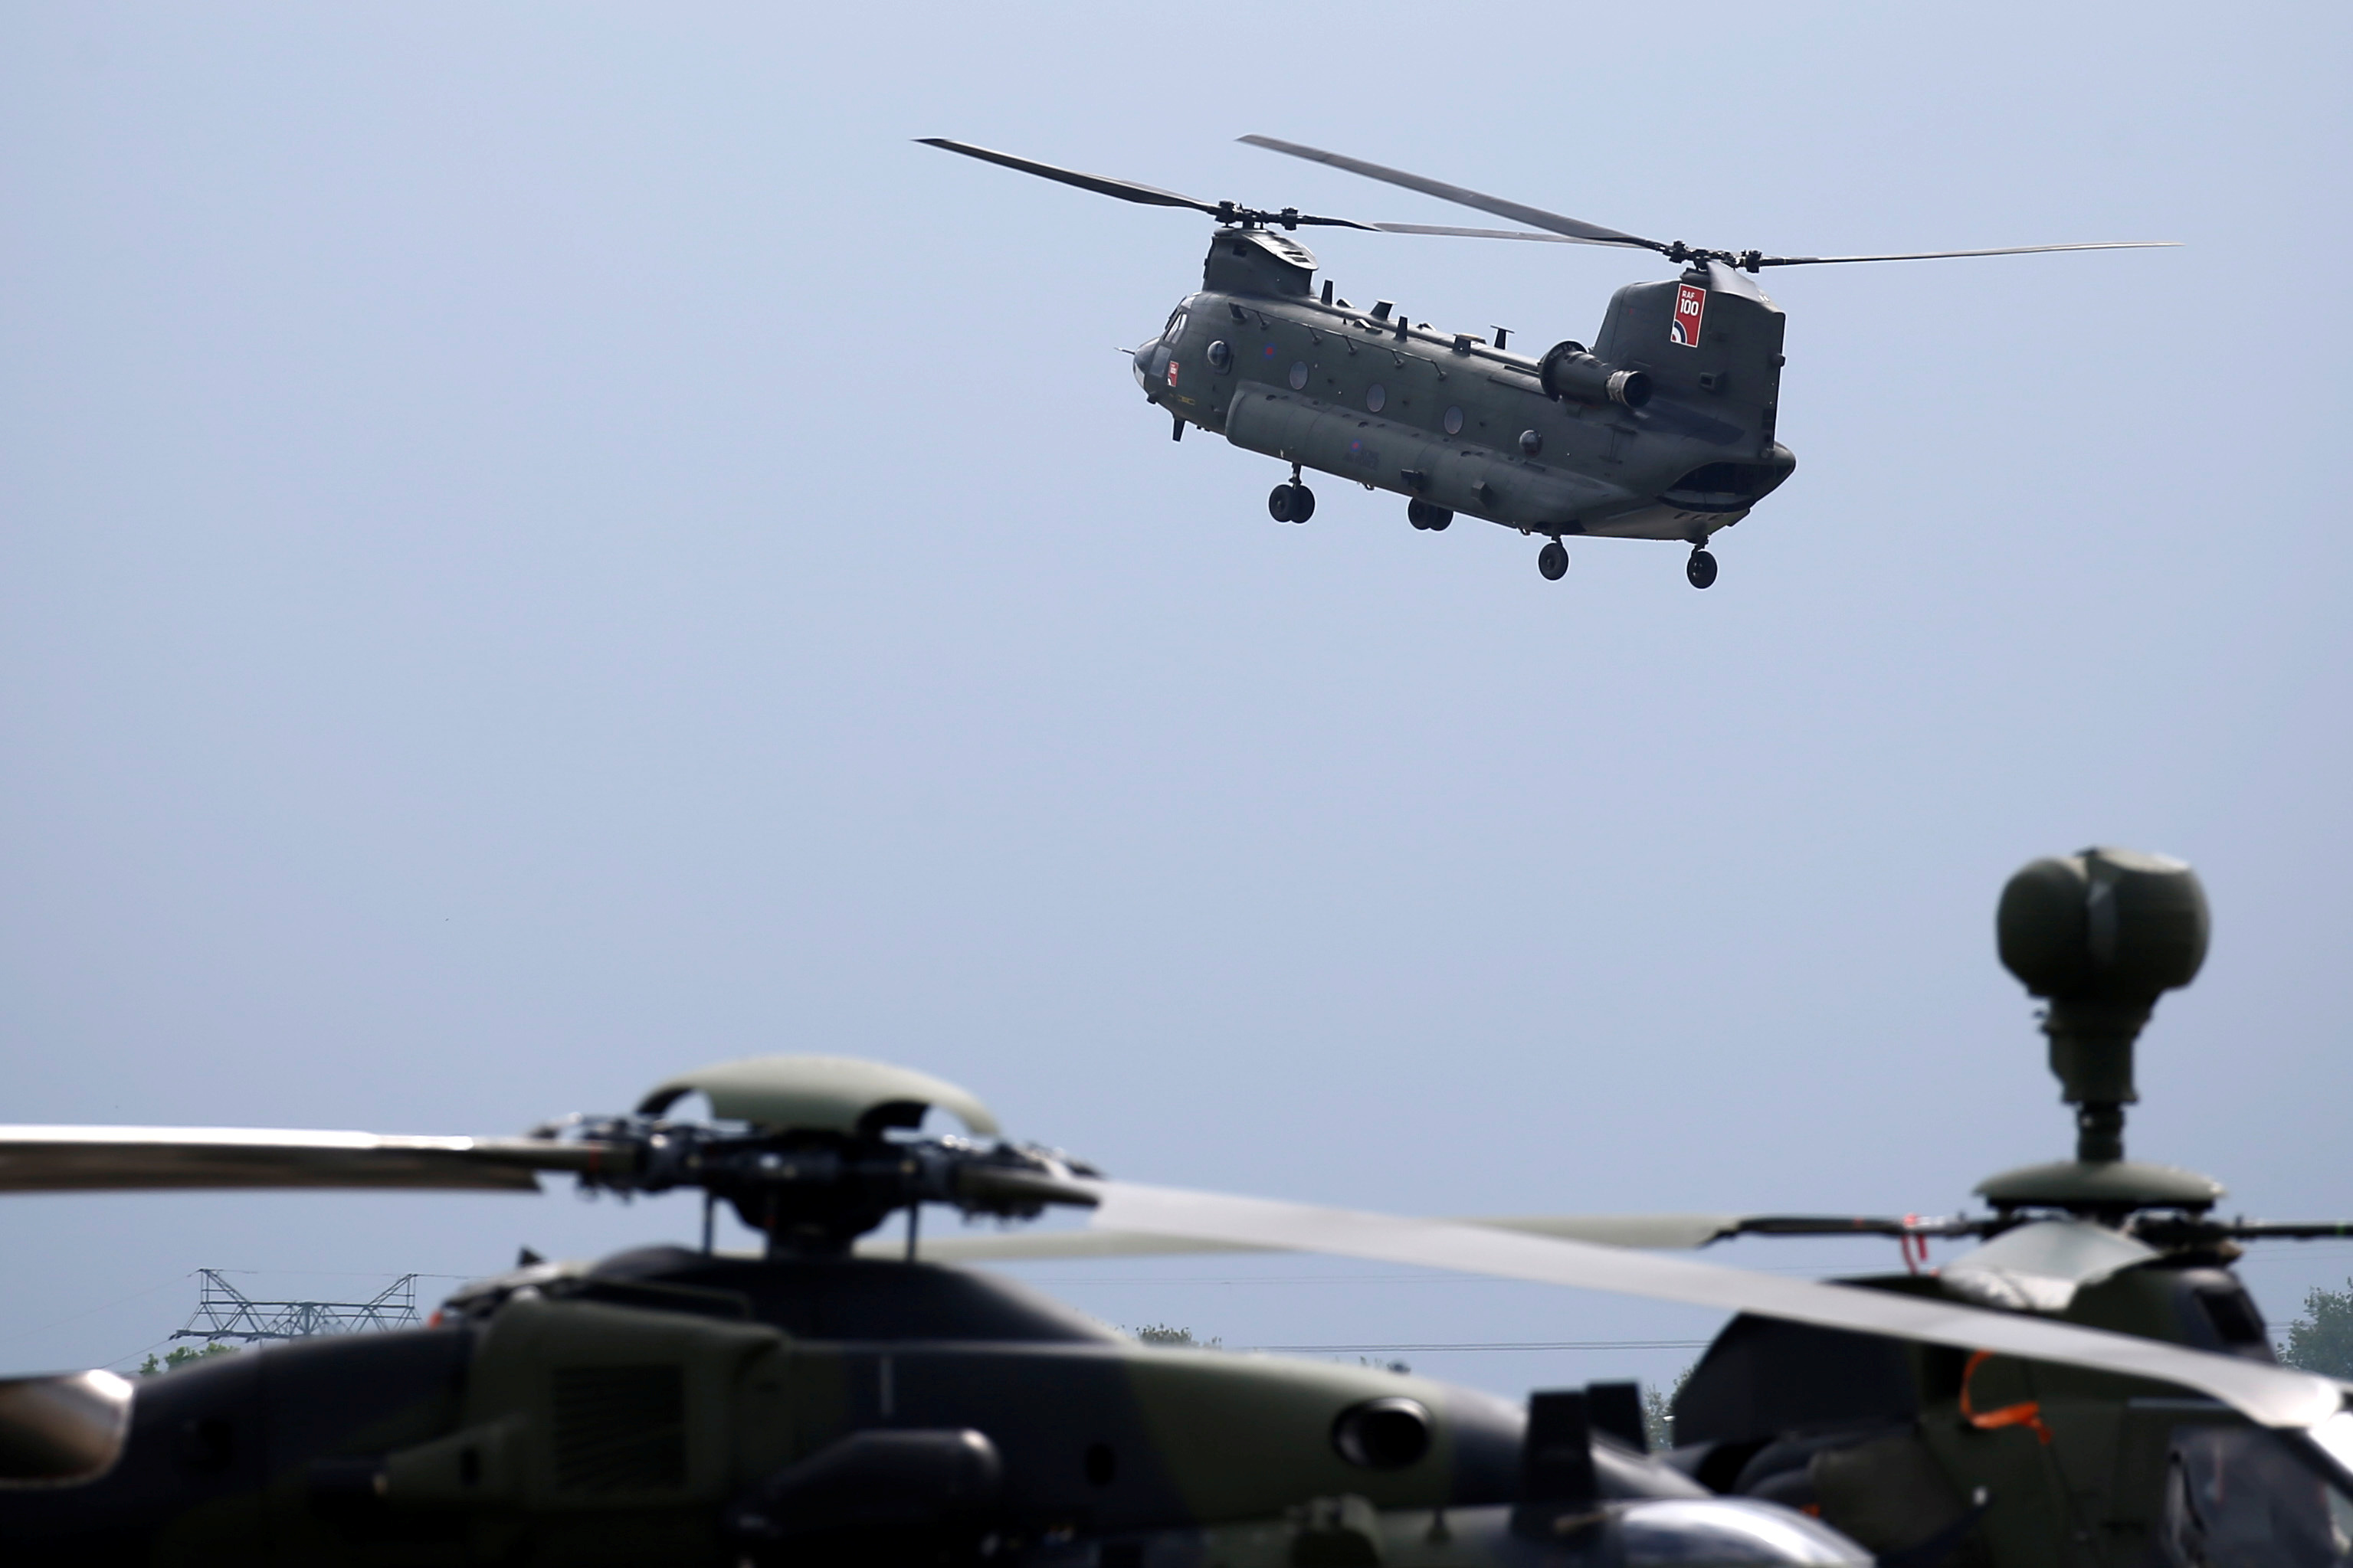 A Boeing CH-47 Chinook helicopter is seen at the ILA Air Show in Berlin